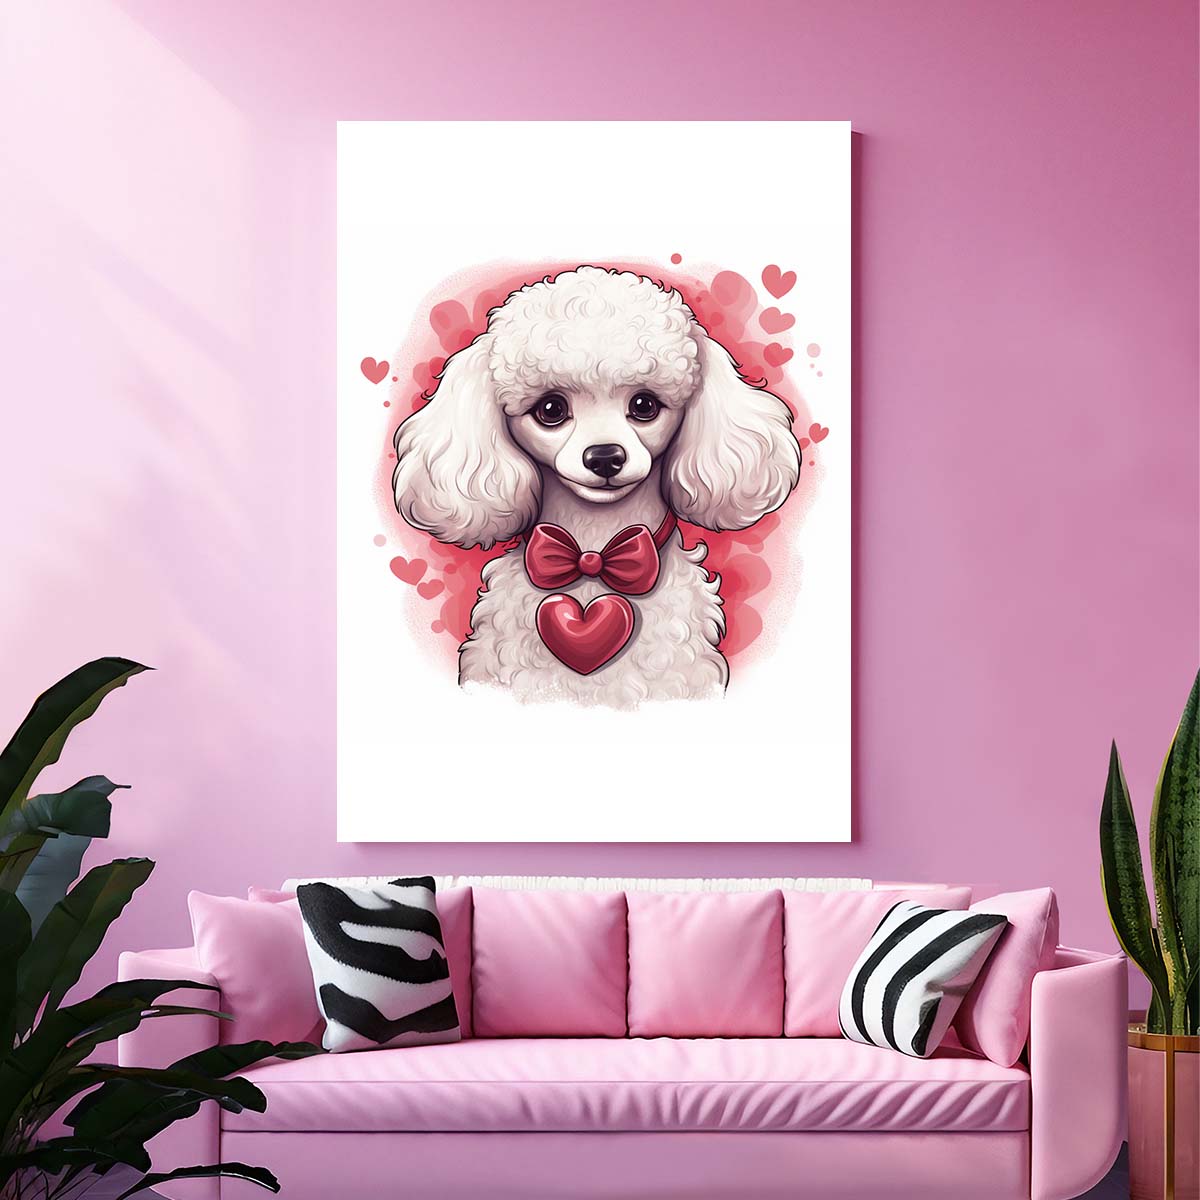 Cute Valentine Puppy Heart, Valentine Dog Canvas Print, Cute Poodle Love Canvas Wall Art, Valentine's Dog Painting, Valentine's Canvas, Pet Lover, Valentines Gift